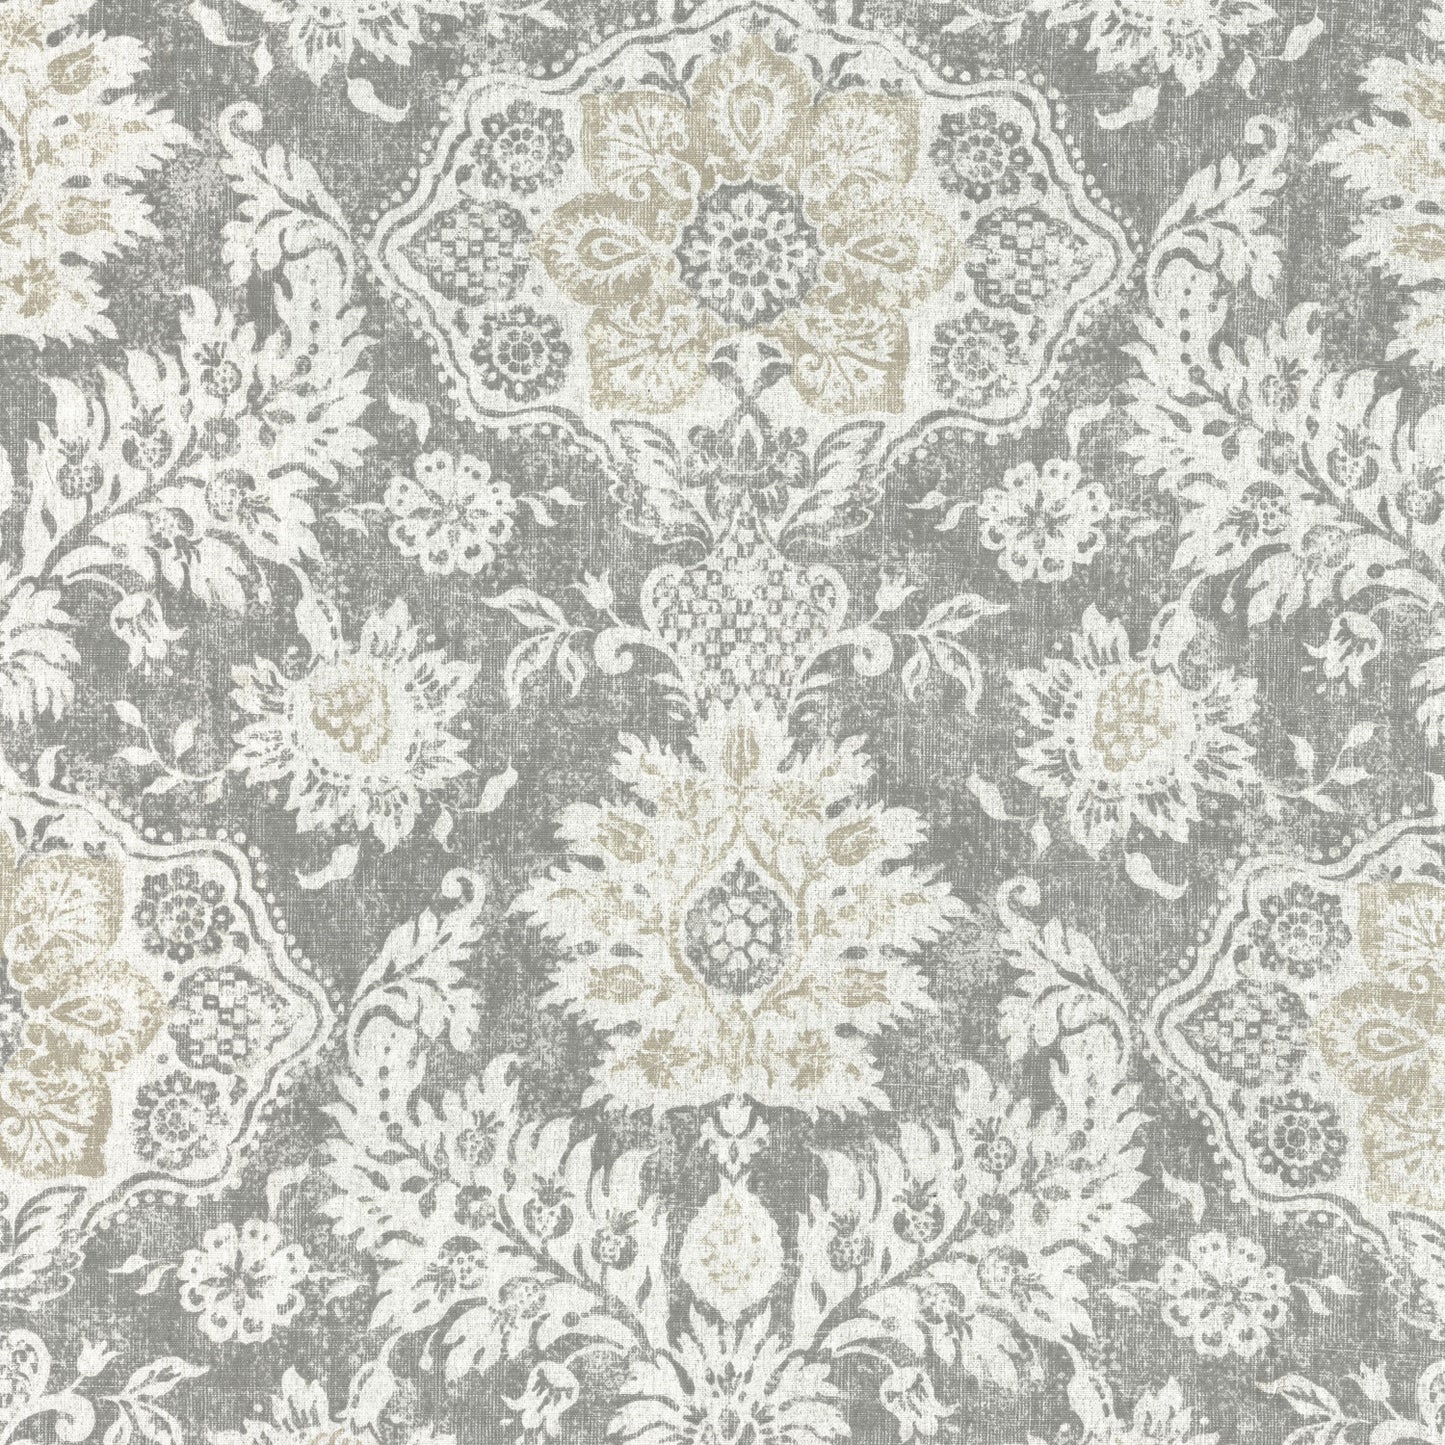 tailored bedskirt in belmont mist pale gray floral damask